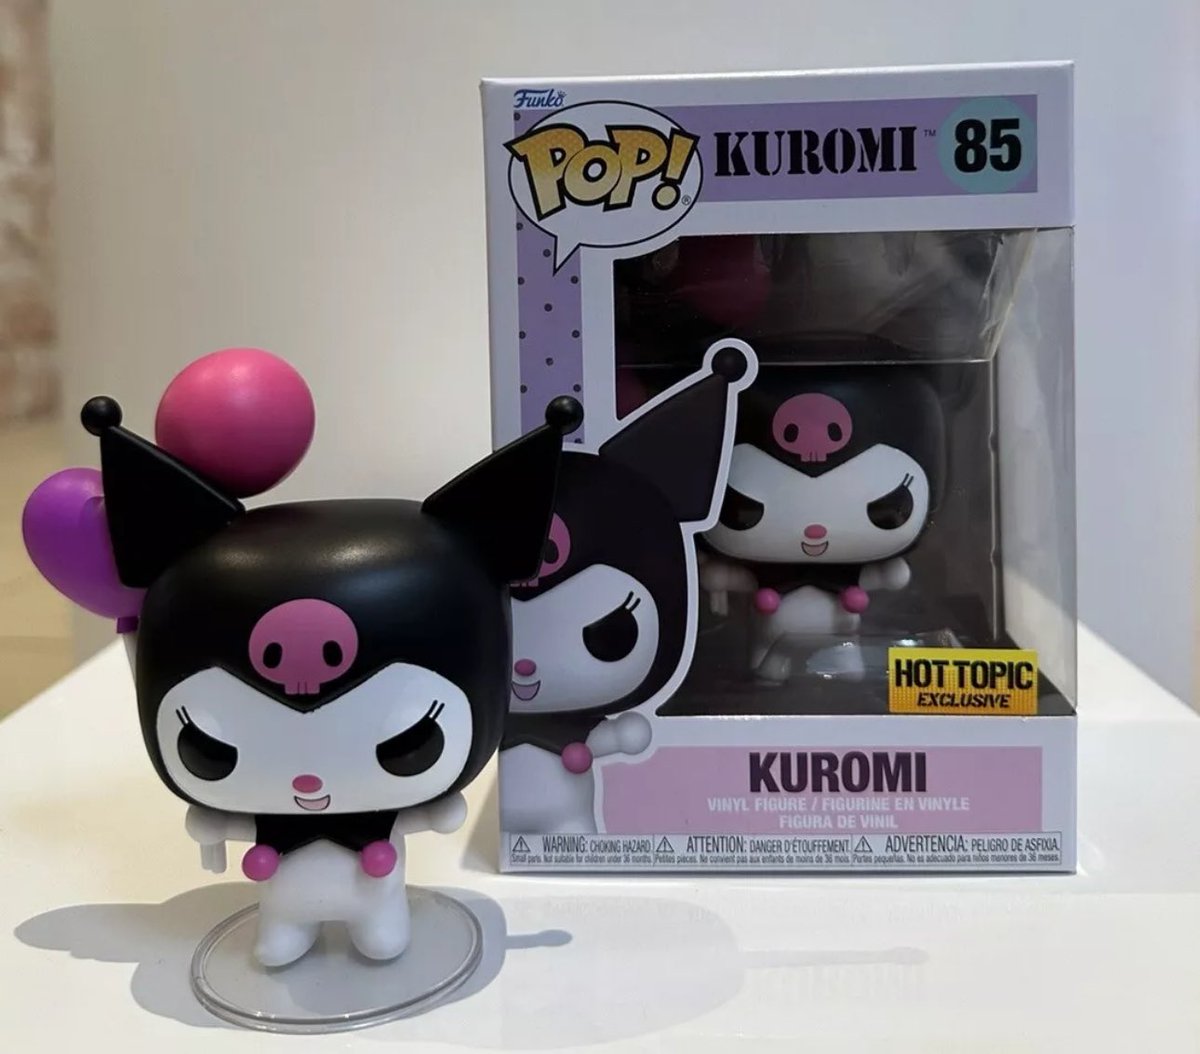 First look at Hot Topic exclusive Kuromi! Hitting stores now & will be online soon.
.
Credit eBay seller 818_collectibles
#Kuromi #Sanrio #Funko #FunkoPop #FunkoPopVinyl #Pop #PopVinyl #Collectibles #Collectible #FunkoCollector #FunkoPops #Collector #Toy #Toys #DisTrackers